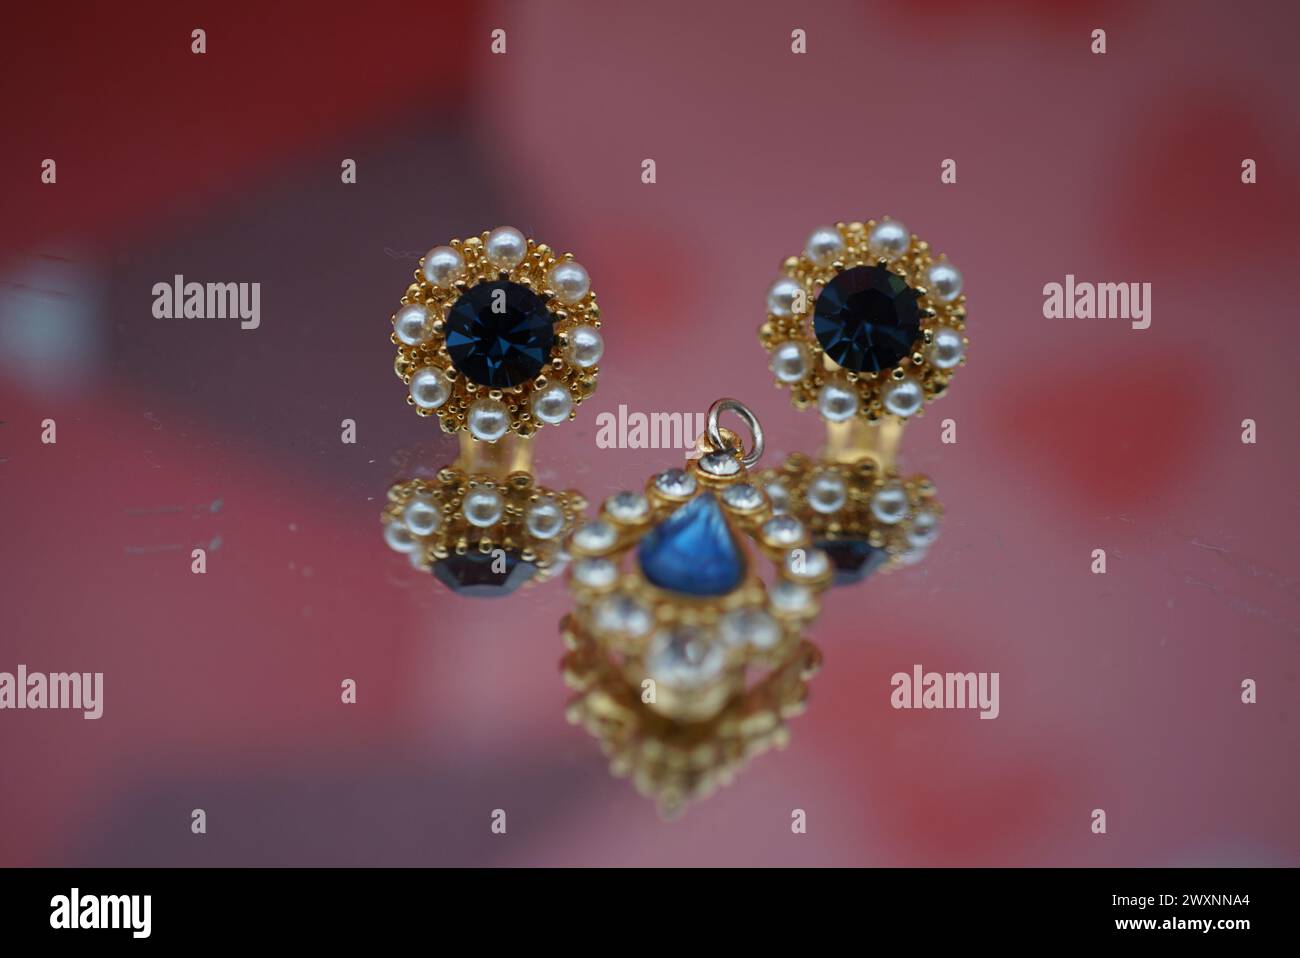 A gold earring adorned with blue diamonds and pearls against a pink backdrop Stock Photo